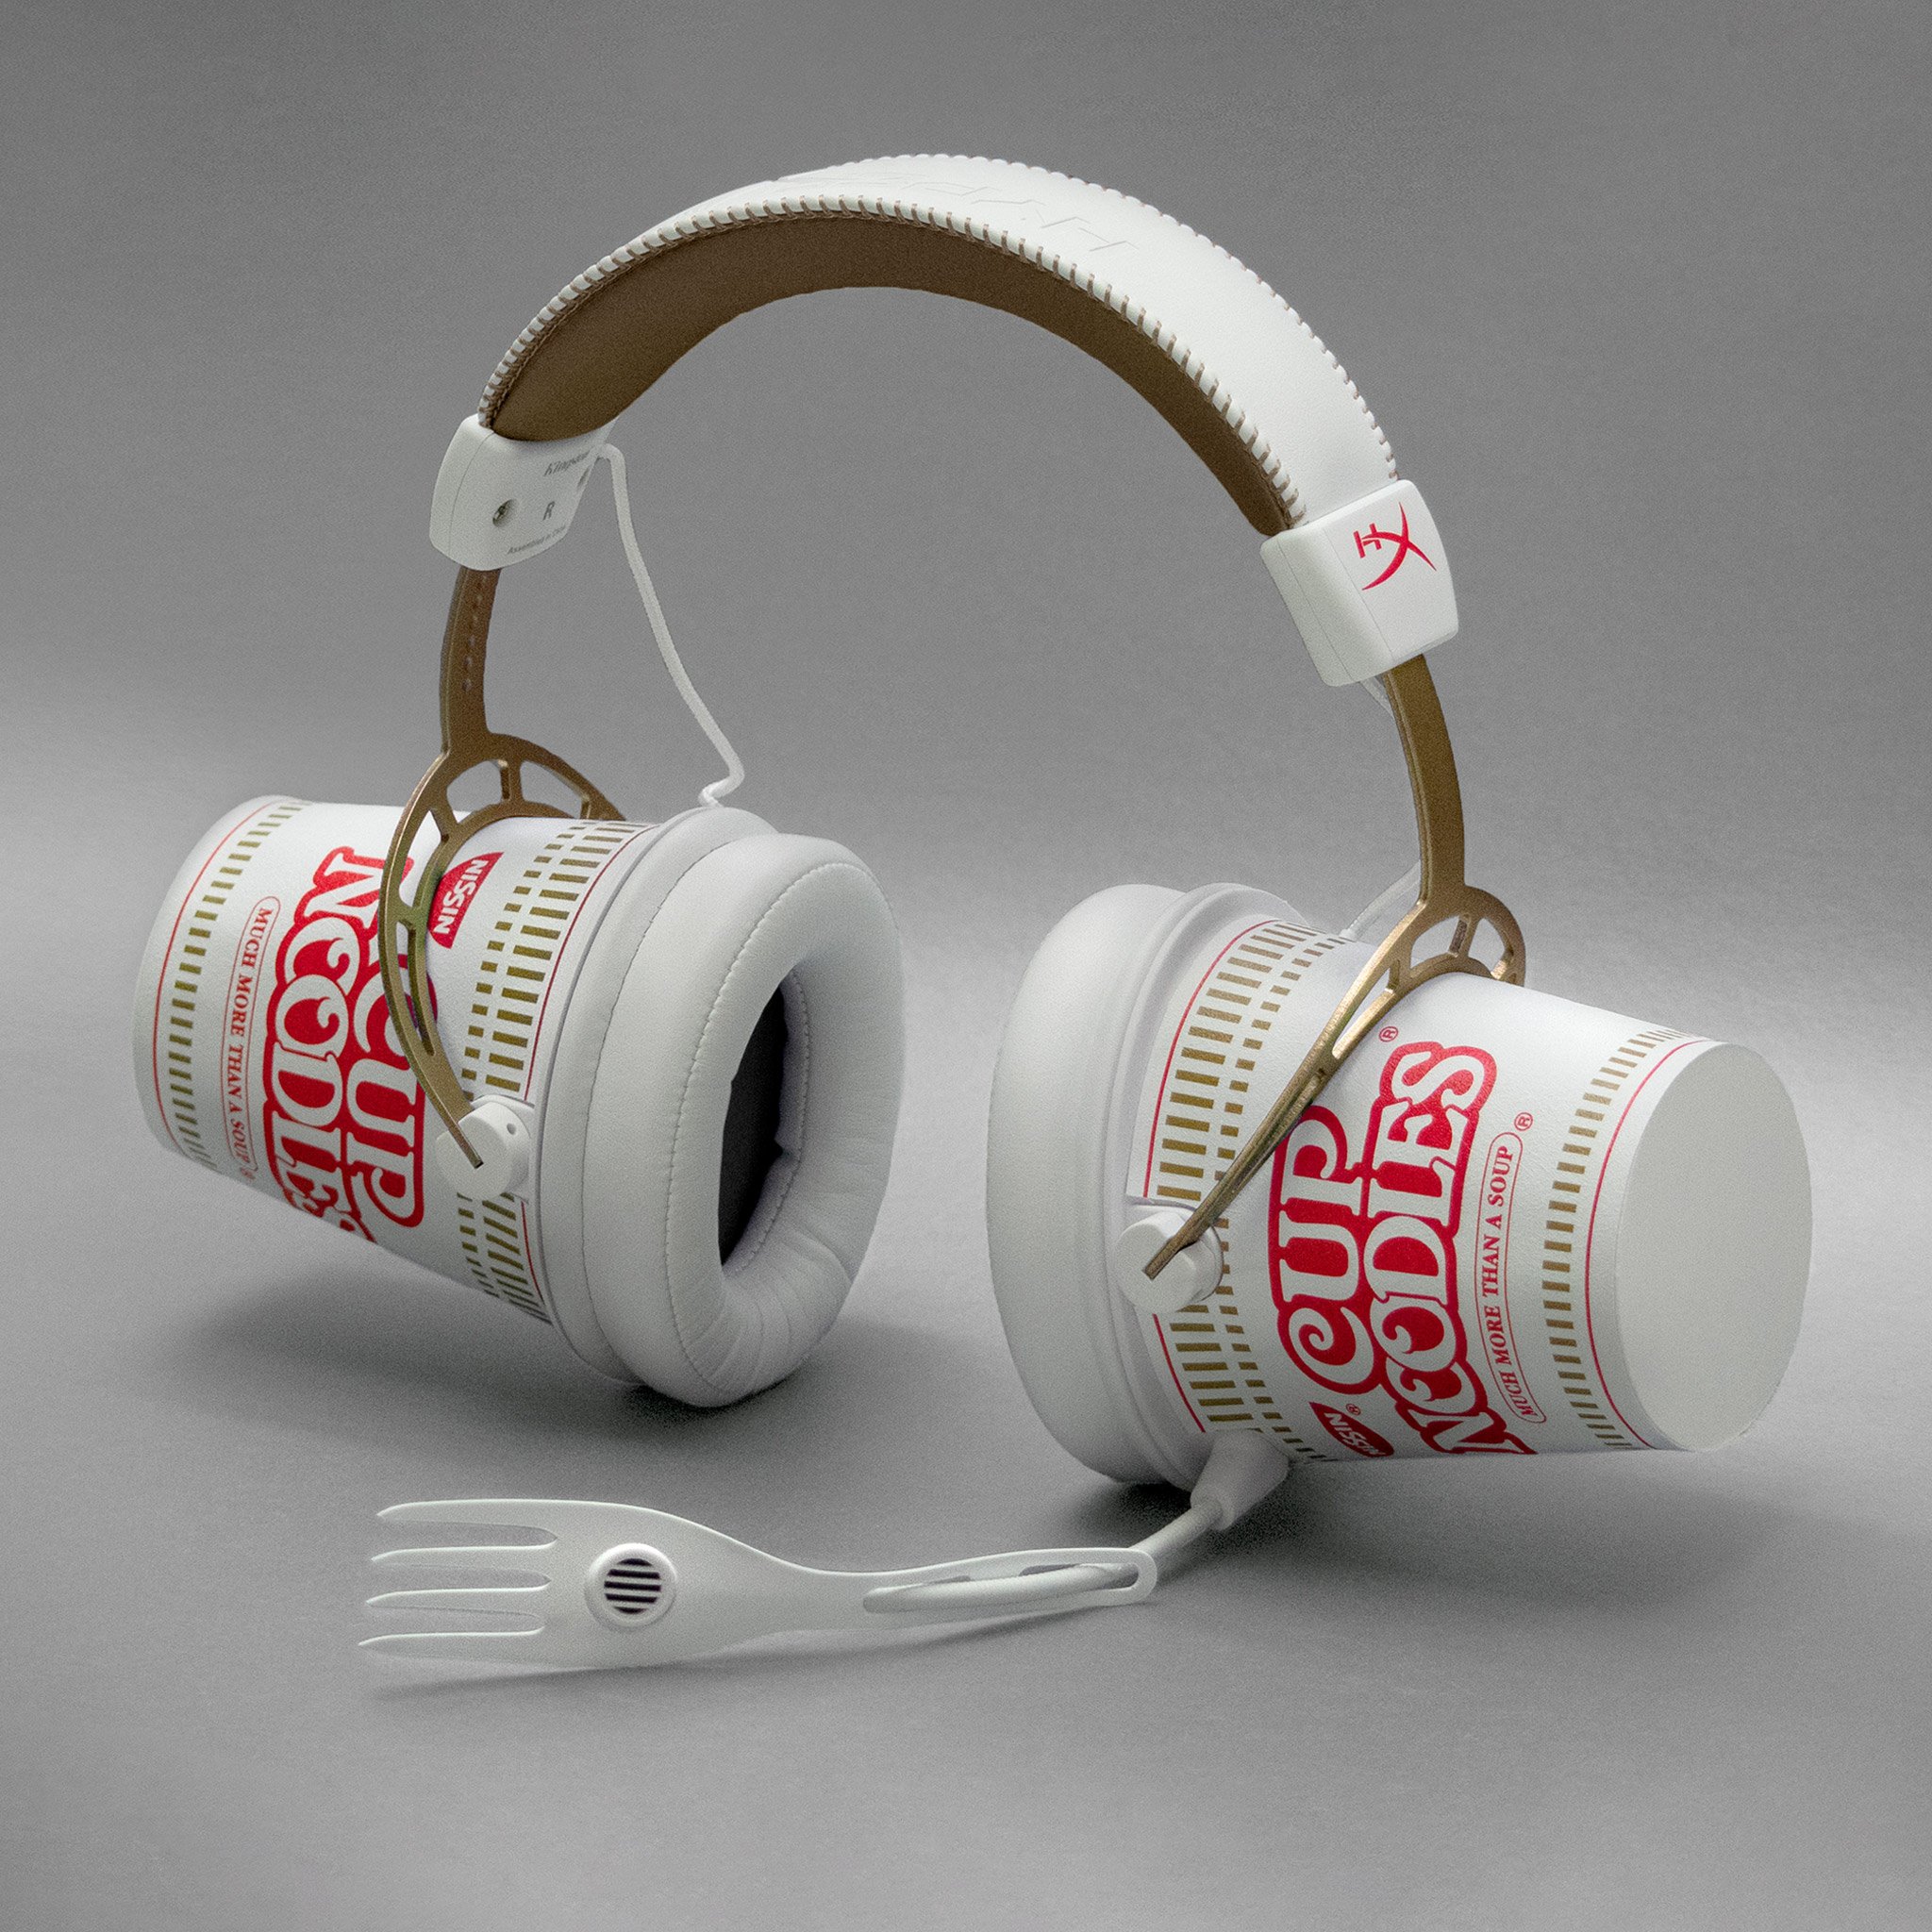 The Nissin Cup Noodles Is A Premium Headphone And It’s Collectible – It’s Been Released On April Fools’ Day